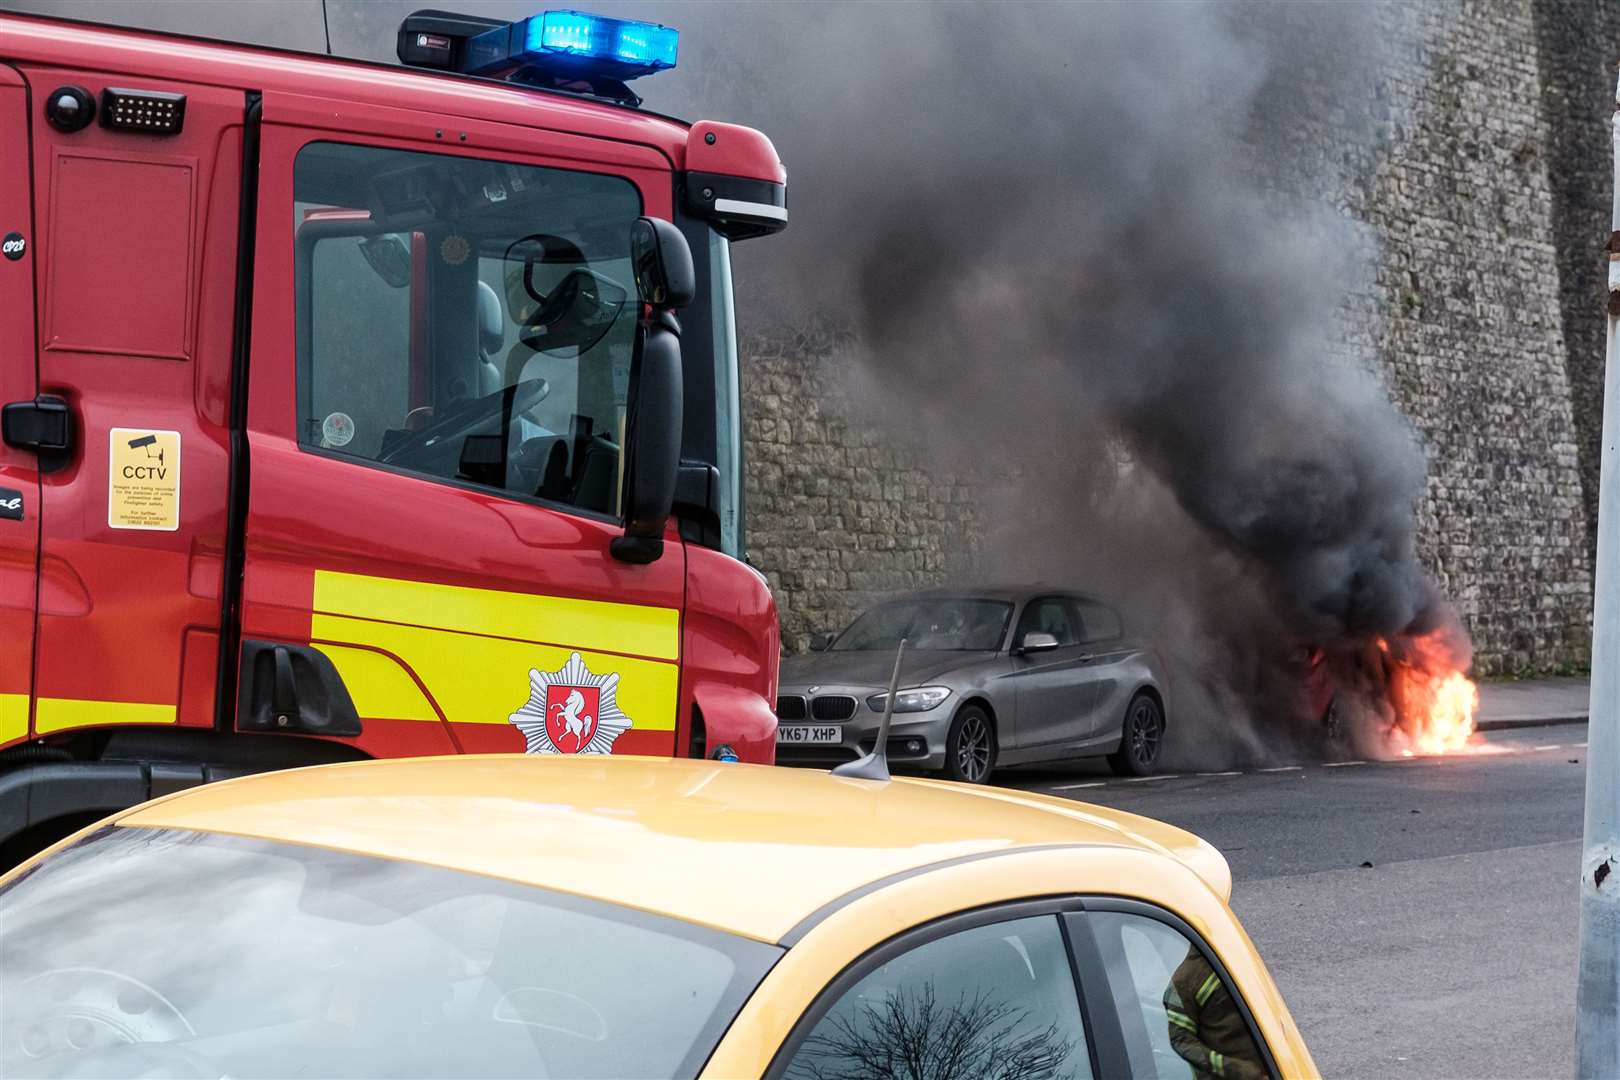 Firefighters doused the flames before it spread to nearby vehicles. Photo: Yousef Al Nasser